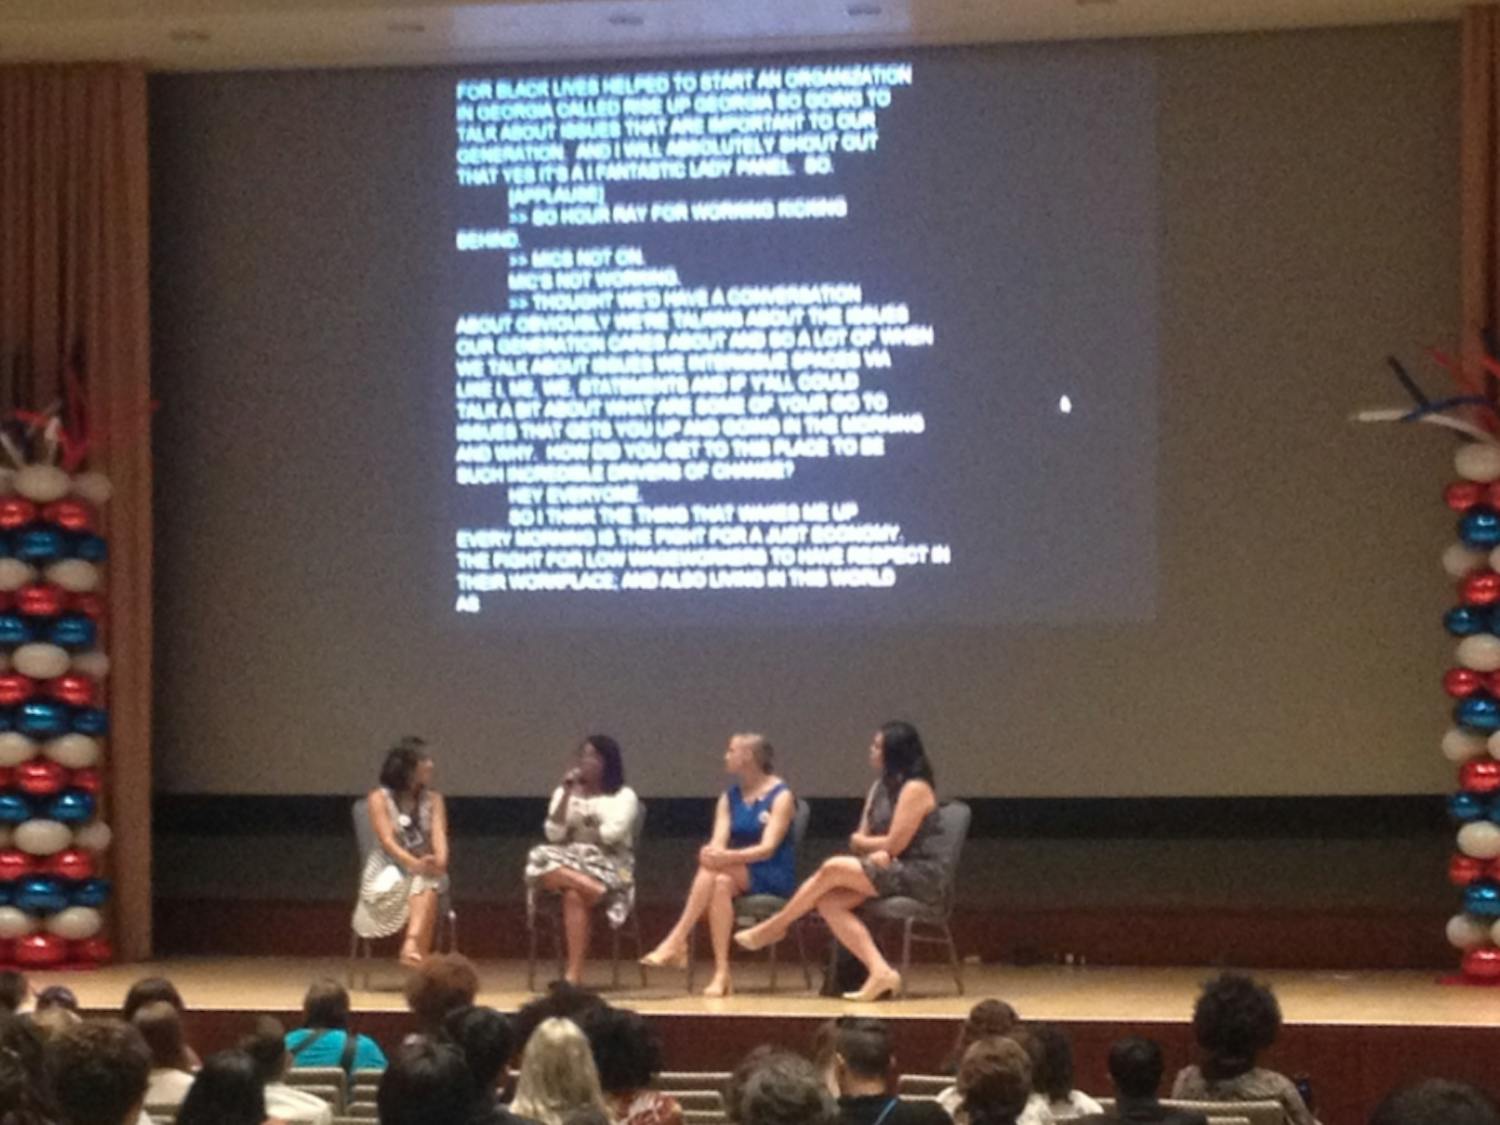 Panelists discuss issues affecting younger voters at the youth council meeting at the Democratic National Convention in Philadelphia on July 27, 2016. From left to right: Sarah Audelo, Clinton campaign millennial vote director; social justice activist Nelini Stamp; Gen Progress Executive Director Maggie Thompson; YP4 director Catalina Velasquez.